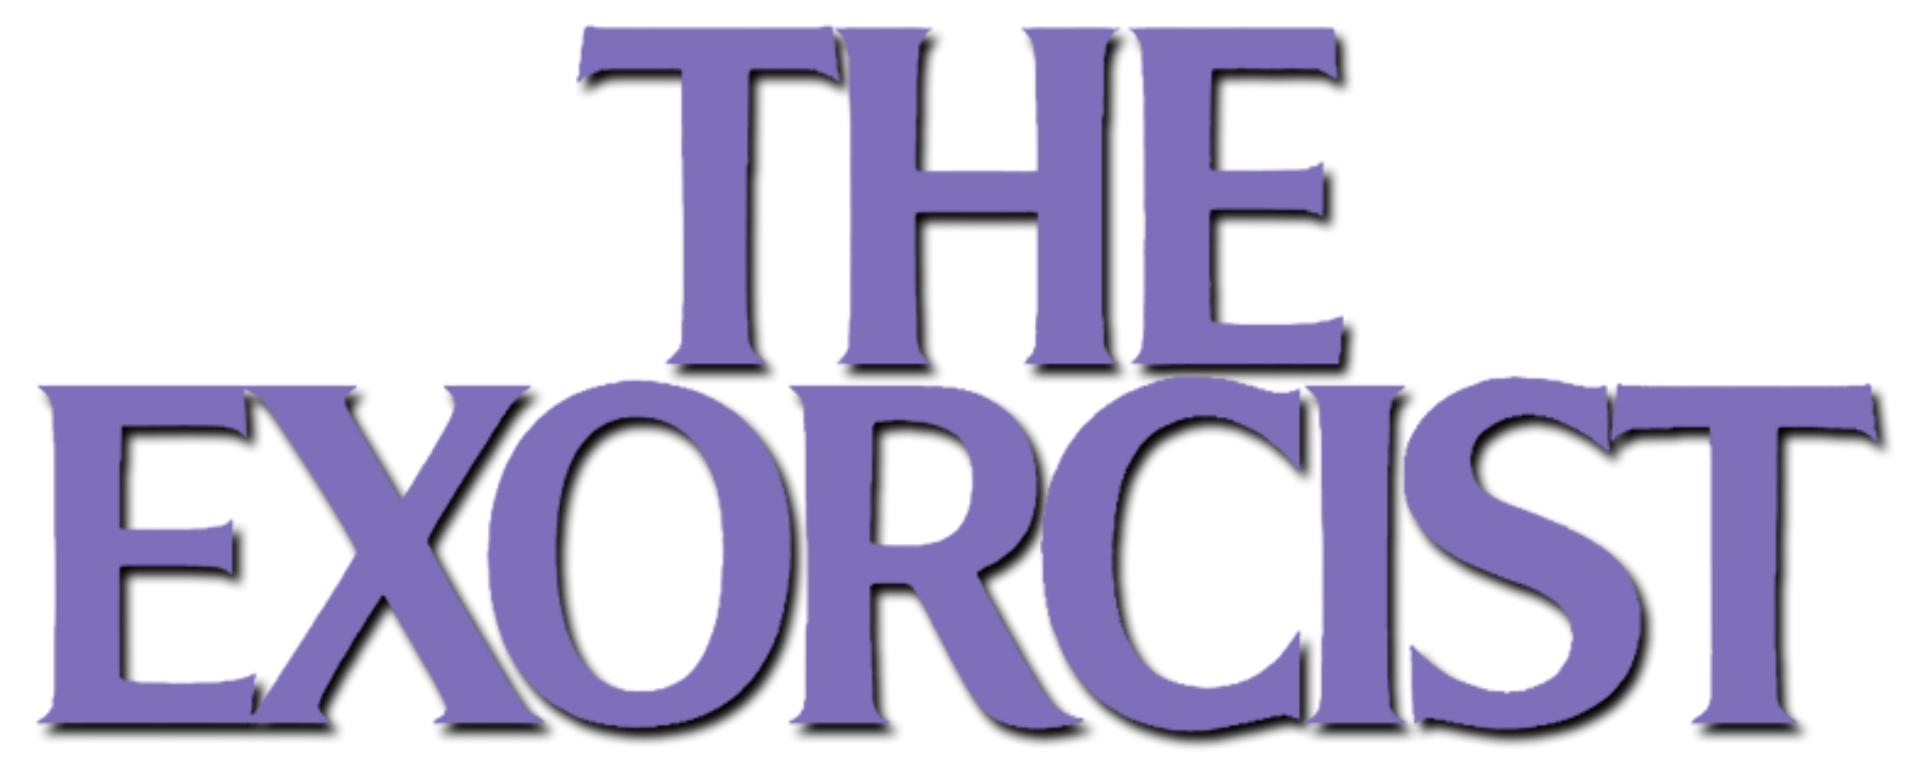 File:The Exorcist (1973) movie logo.png - Wikimedia Commons